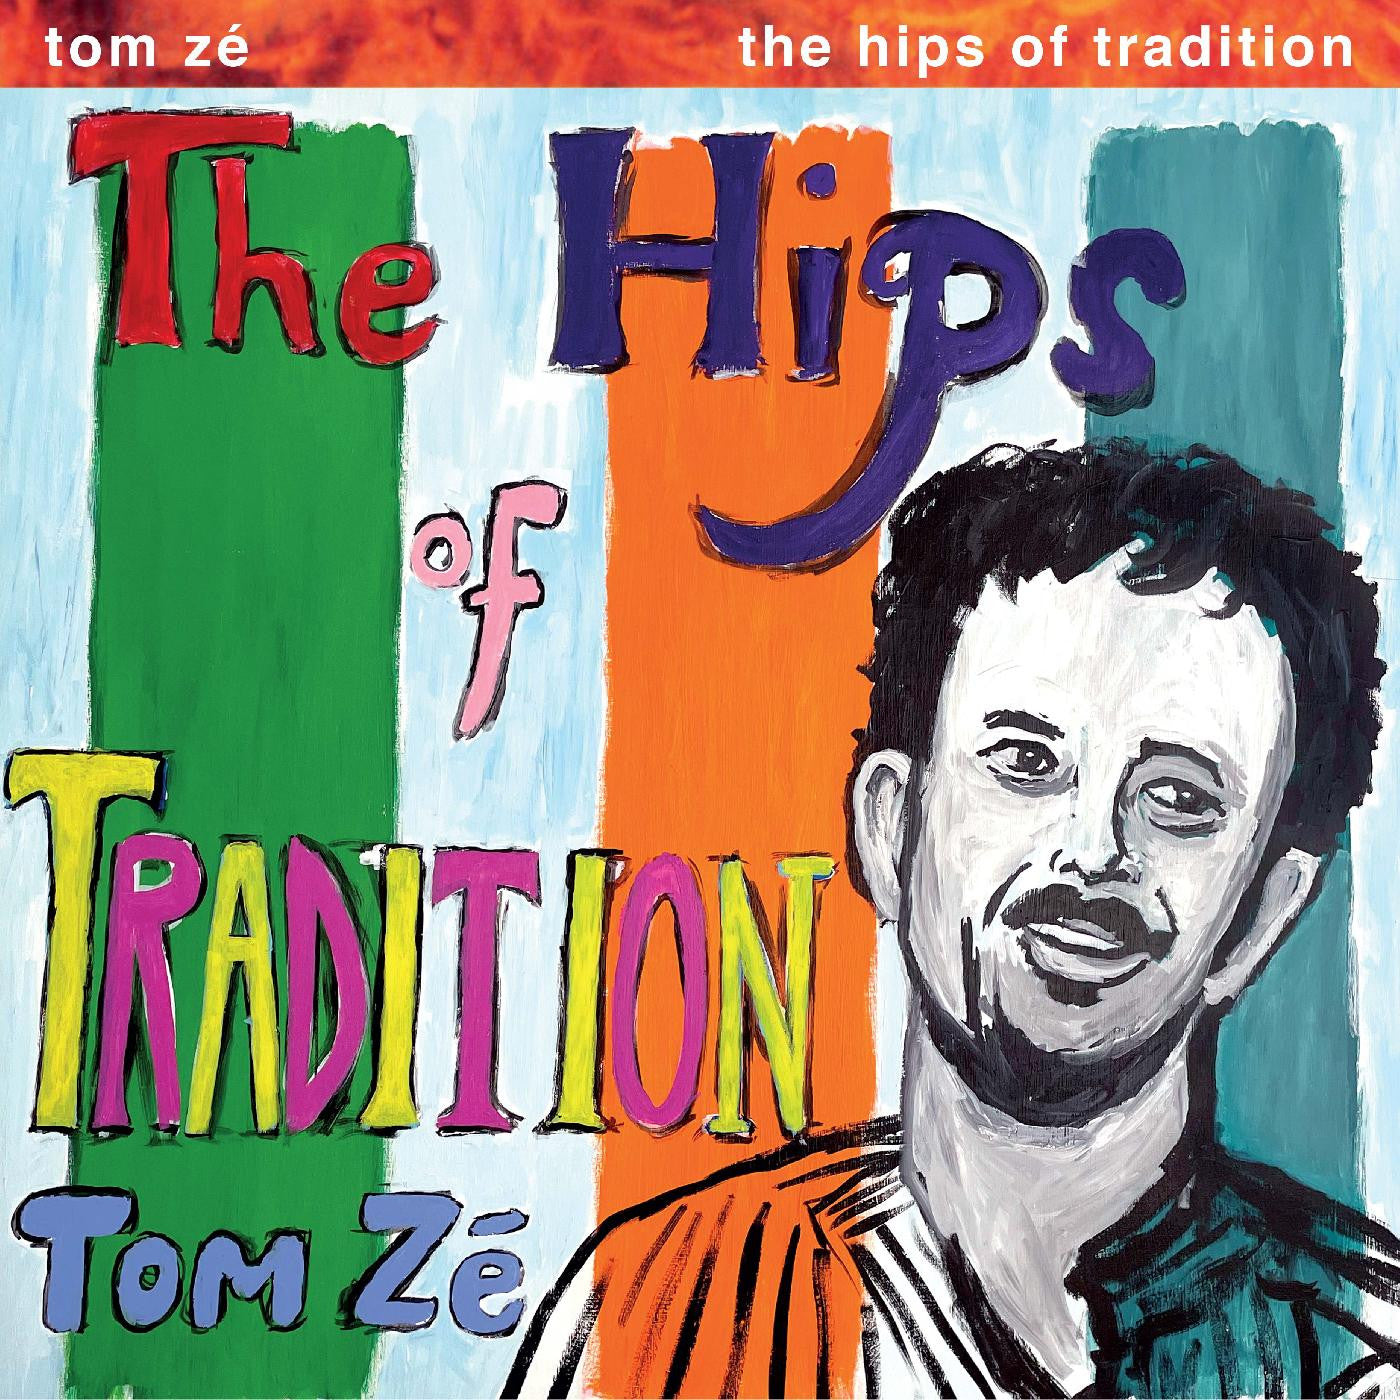 Tom Ze - The Hips of Tradition (Vinyl Green LP)